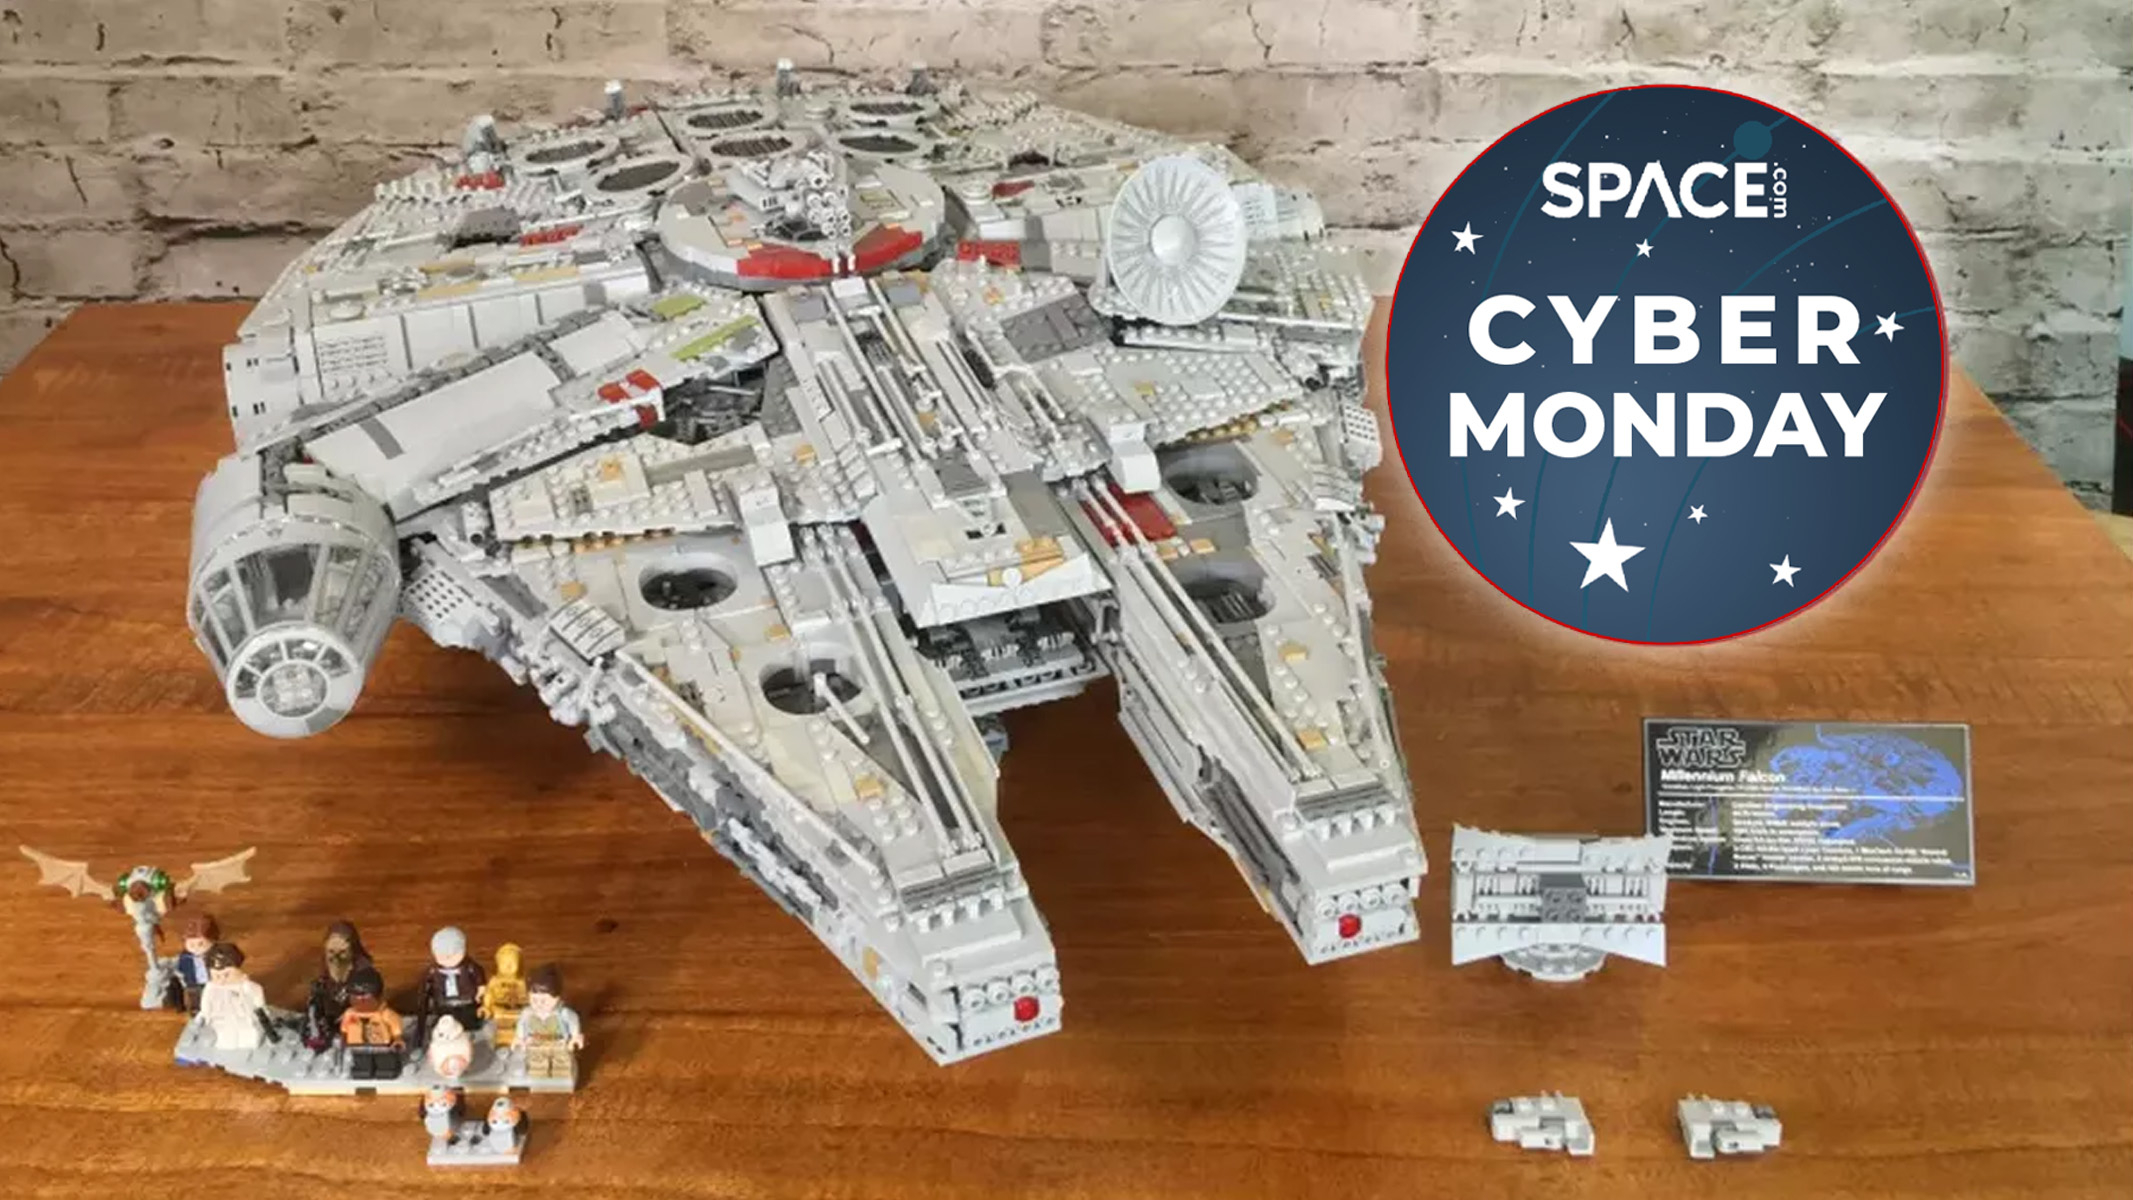 Last chance to save $180 on Lego's epic Star Wars UCS Millennium Falcon for Cyber Monday